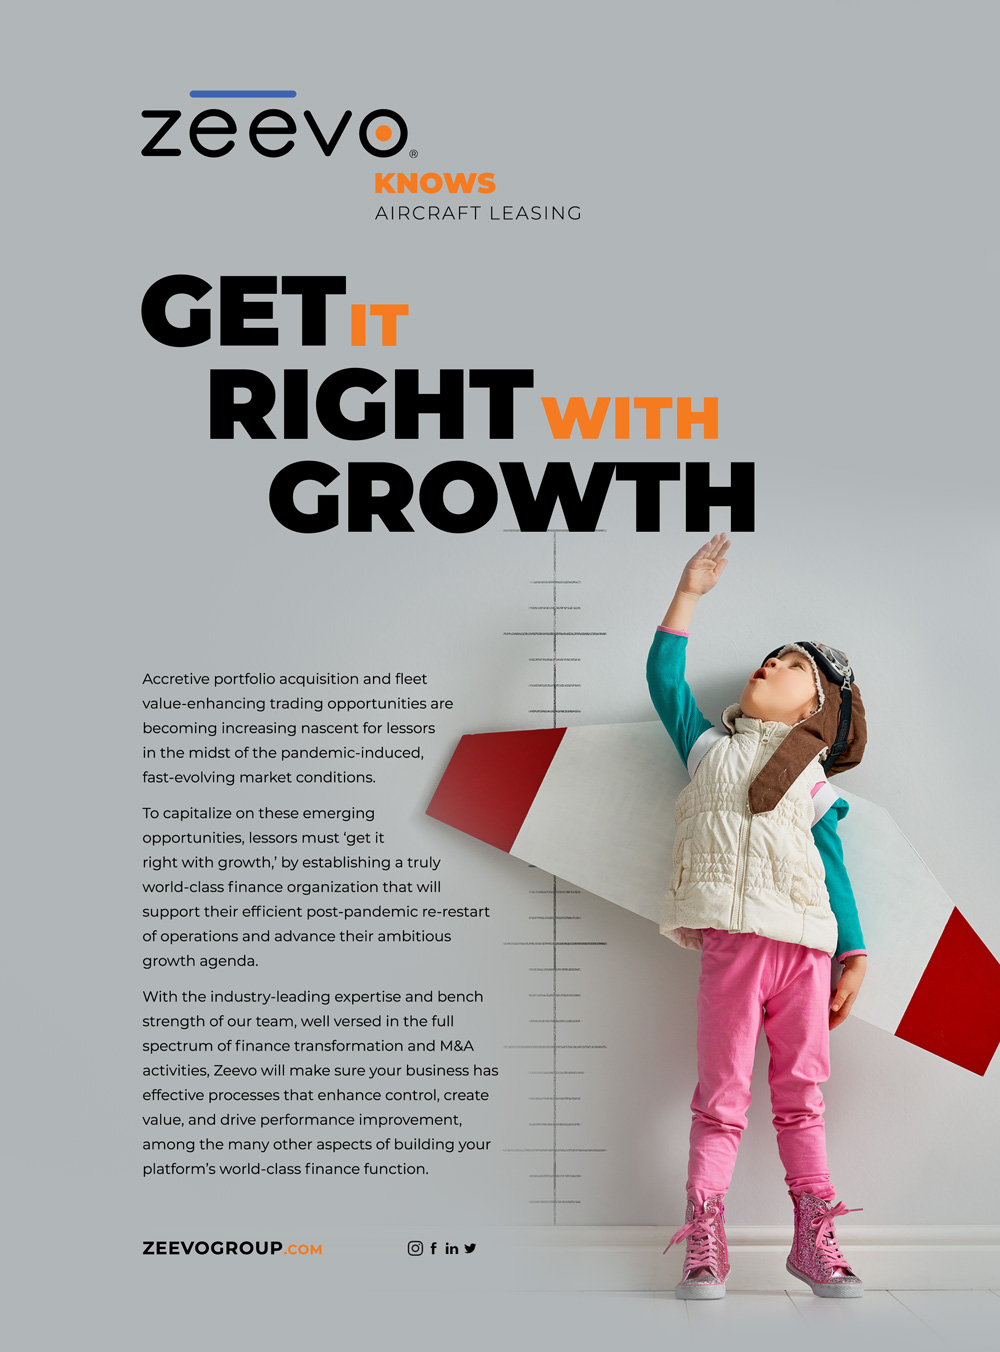 Zeevo Group - Get it right with growth - Airfinance Journal